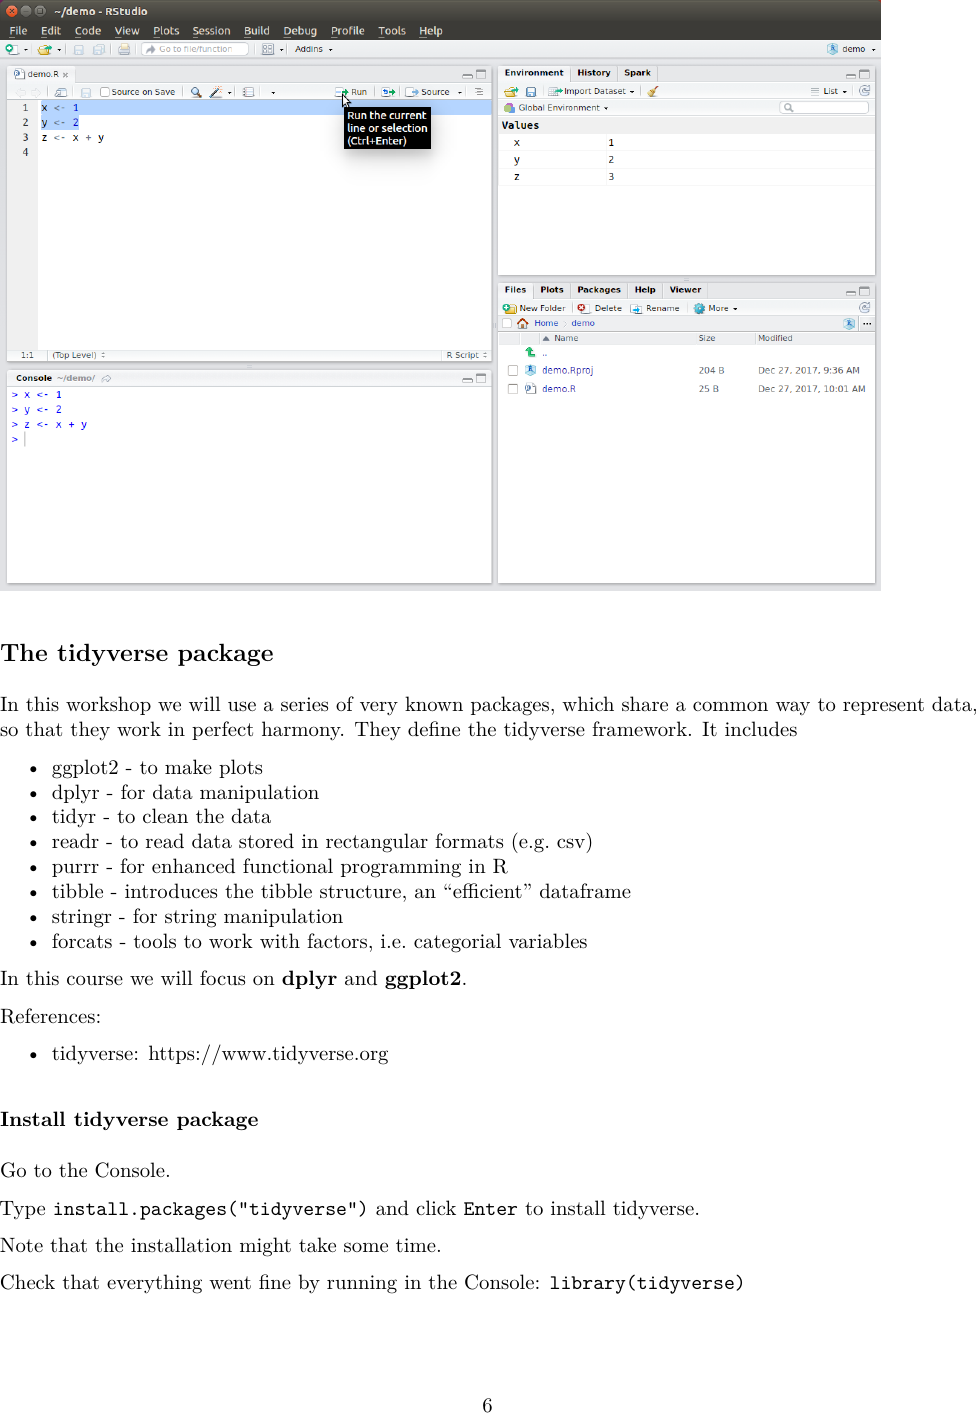 Page 6 of 10 - Install R And RStudio Instructions